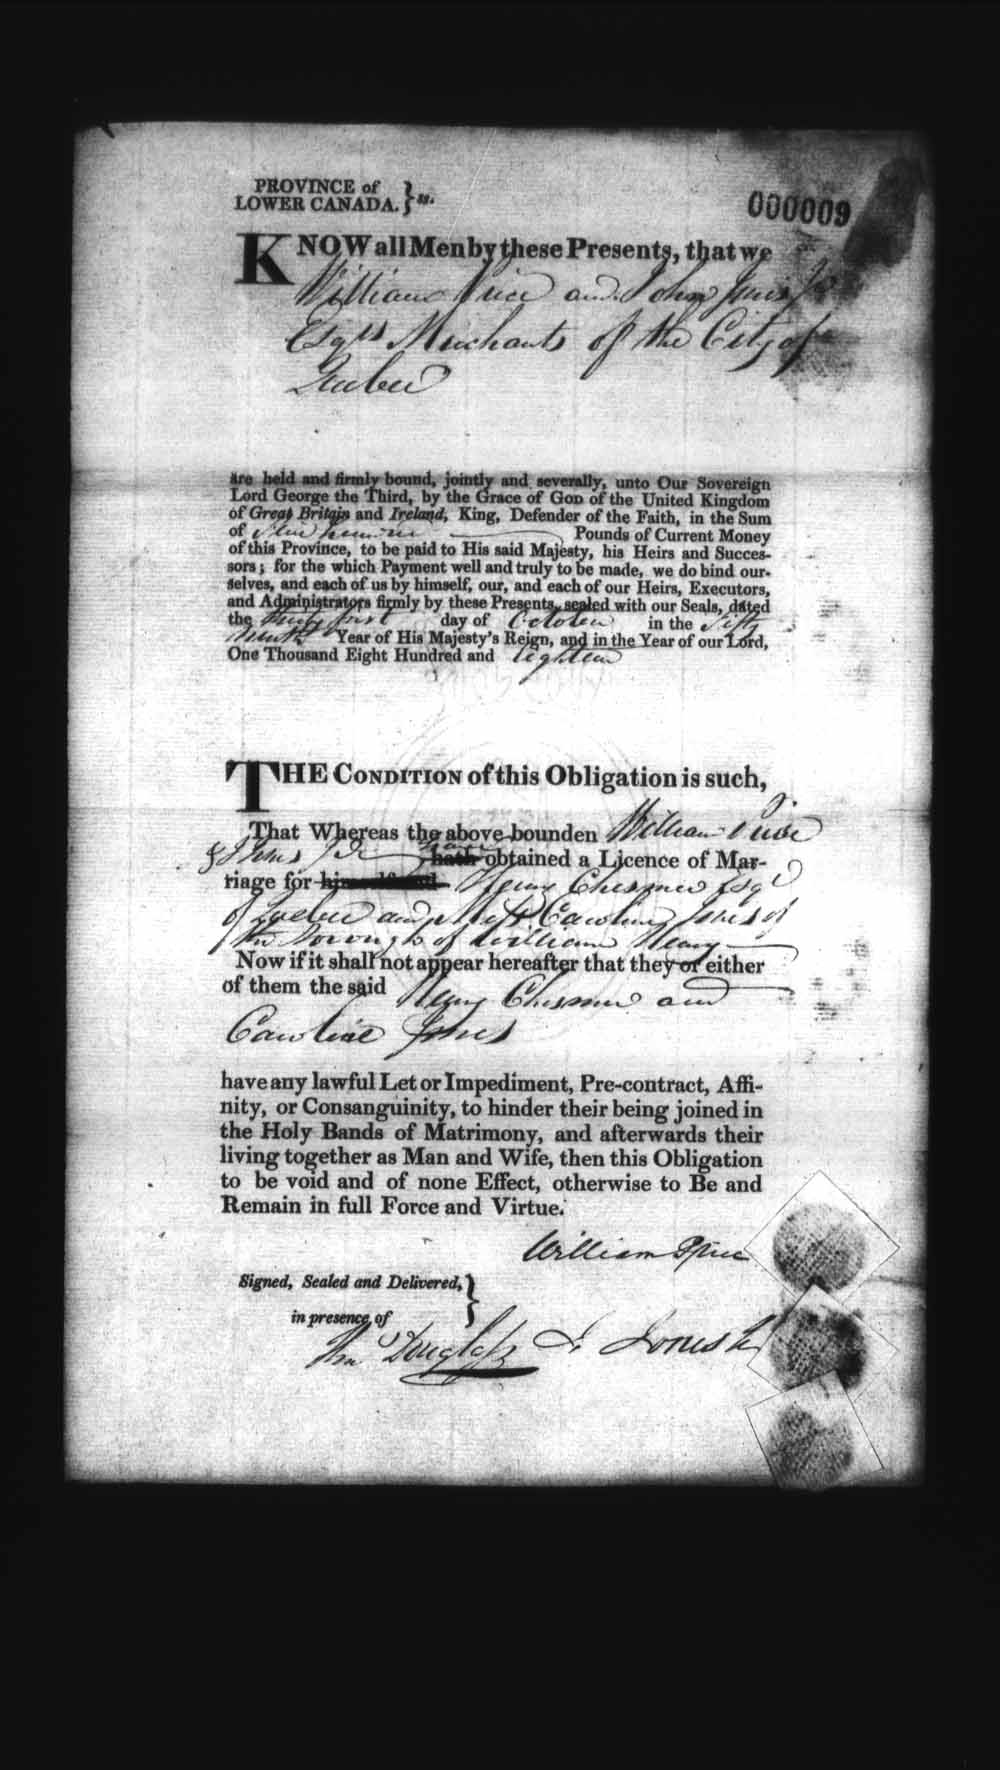 Digitized page of Upper and Lower Canada Marriage Bonds (1779-1865) for Image No.: e008235817